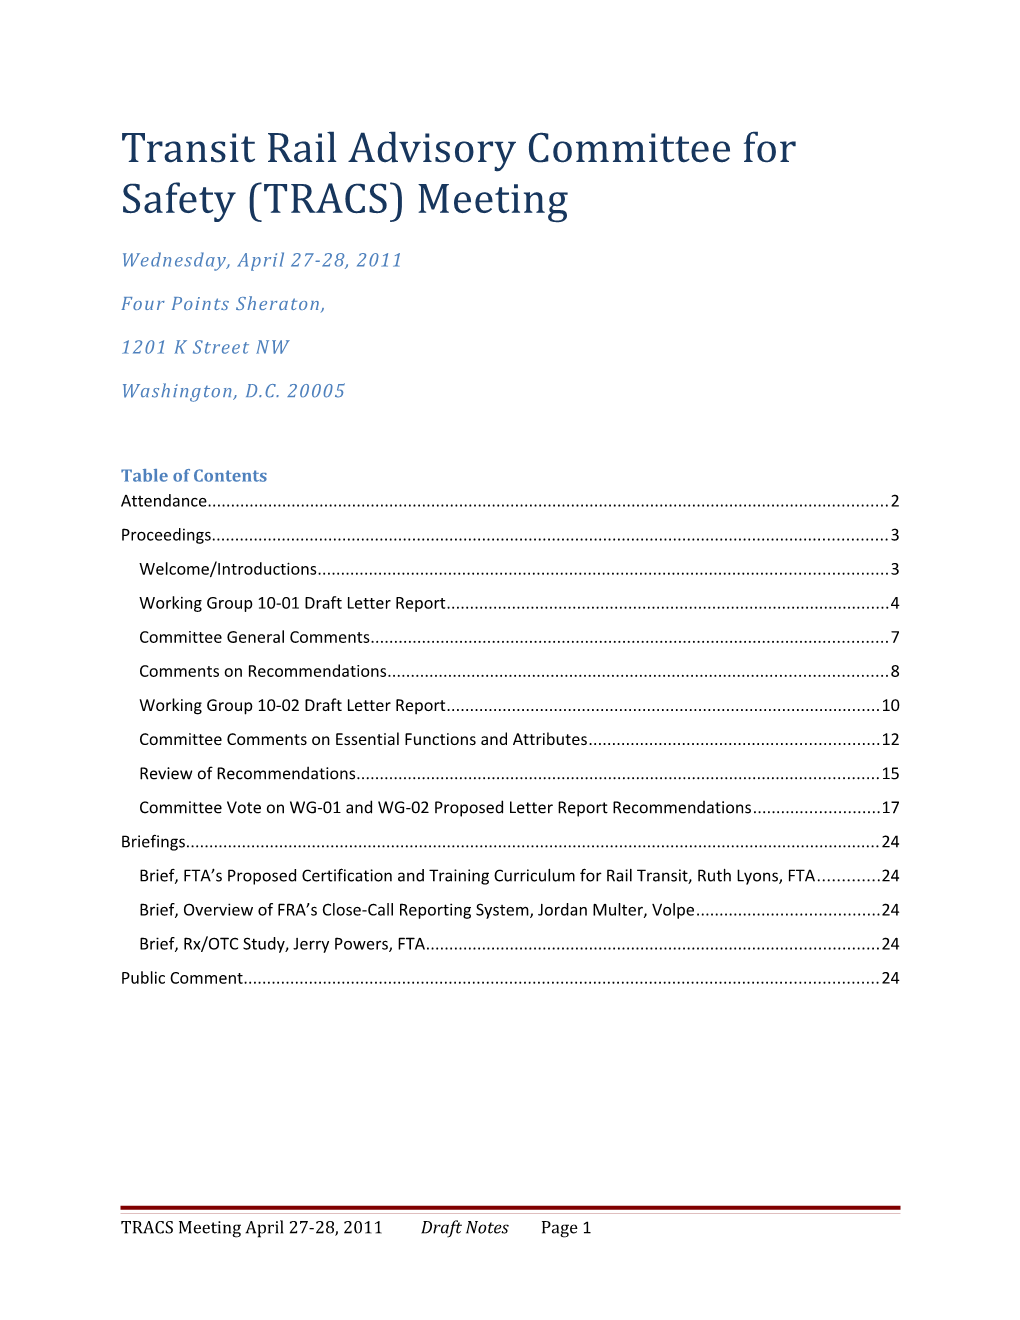 Transit Rail Advisory Committee for Safety (TRACS) Meeting